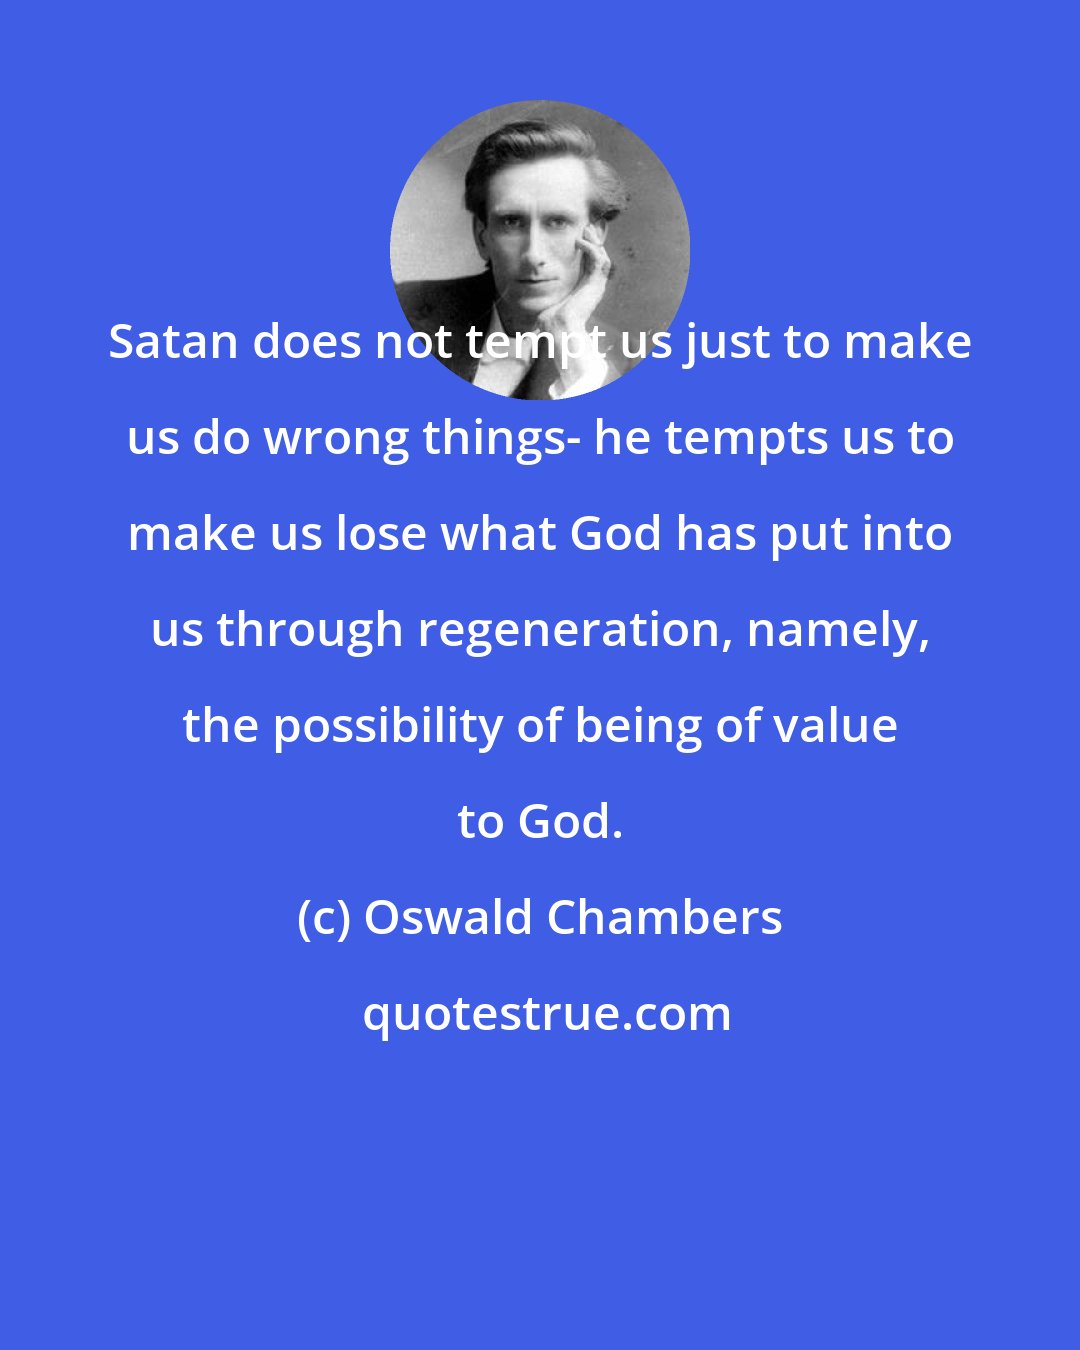 Oswald Chambers: Satan does not tempt us just to make us do wrong things- he tempts us to make us lose what God has put into us through regeneration, namely, the possibility of being of value to God.